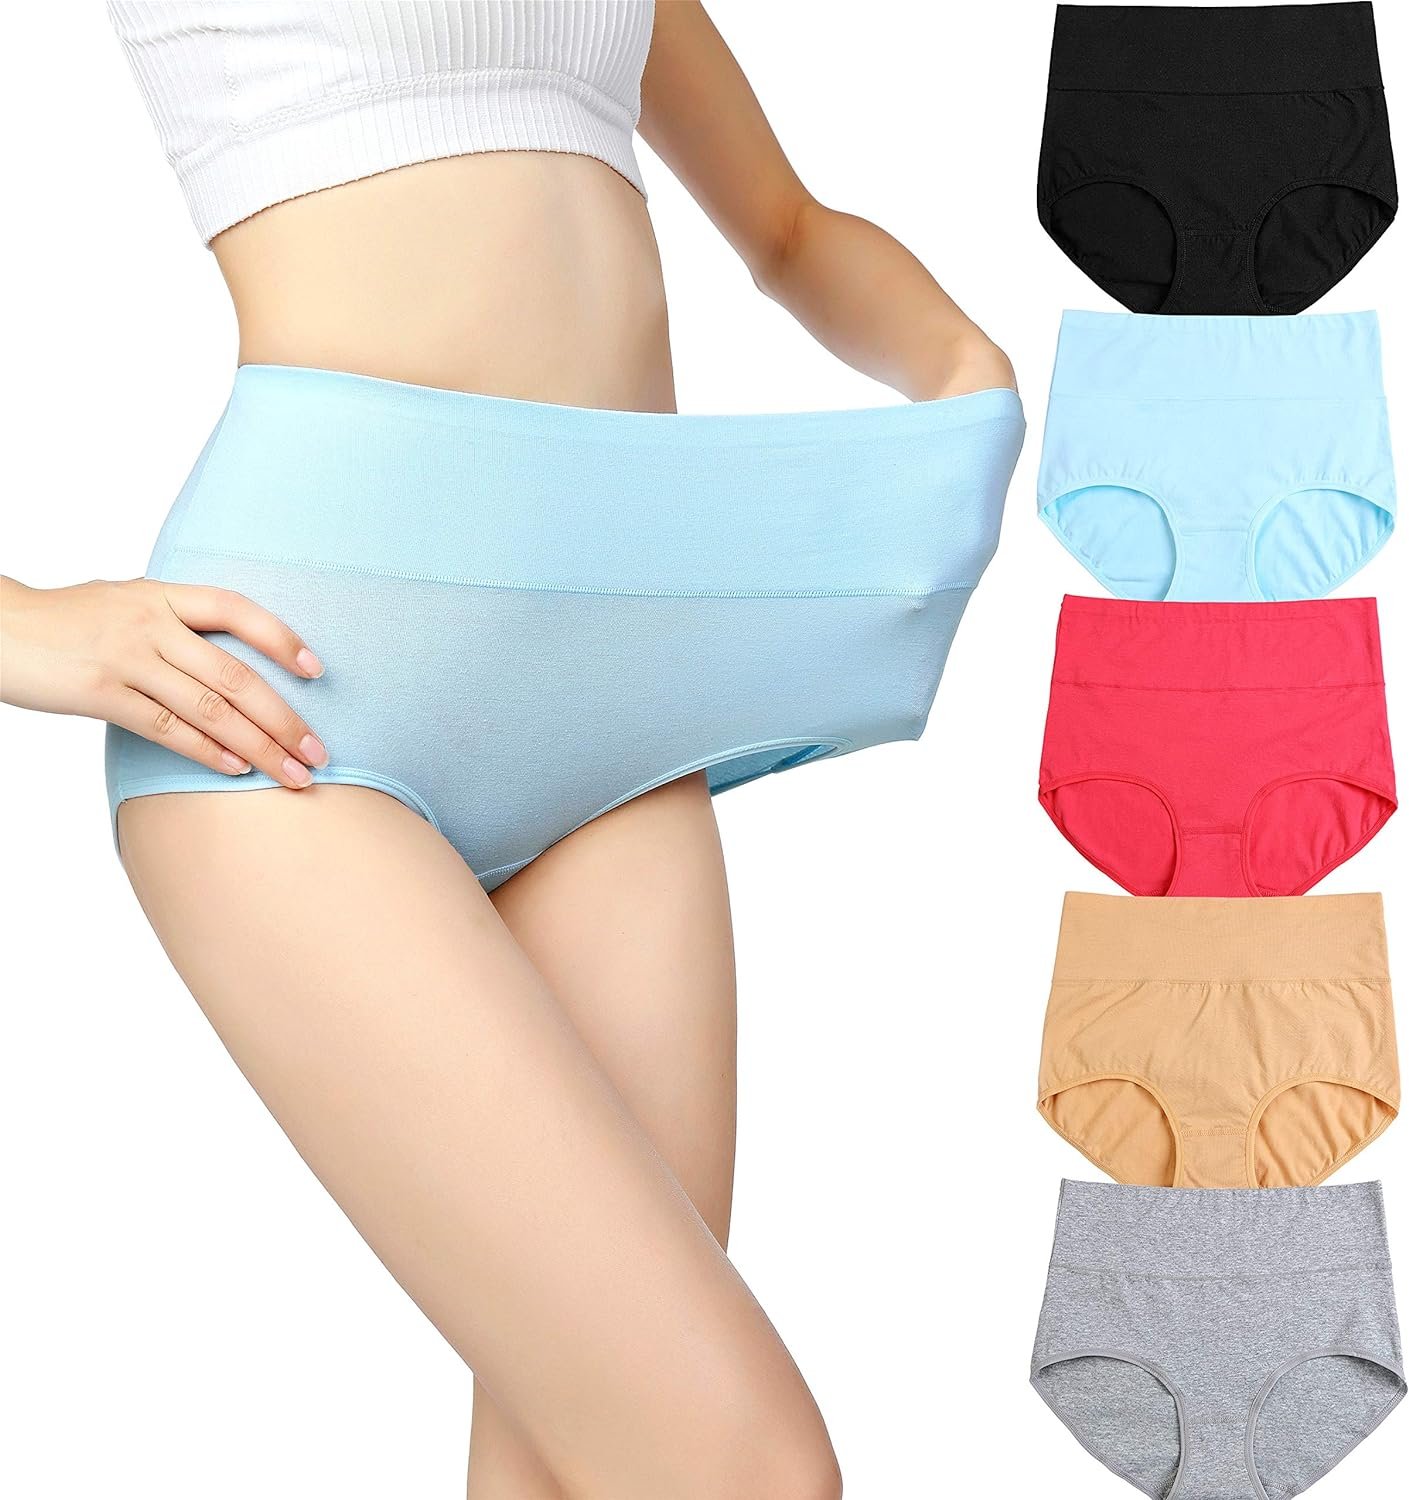 cauniss Womens High Waist Cotton Panties C Section Recovery Postpartum Soft Stretchy Full Coverage Underwear(5 Pack)